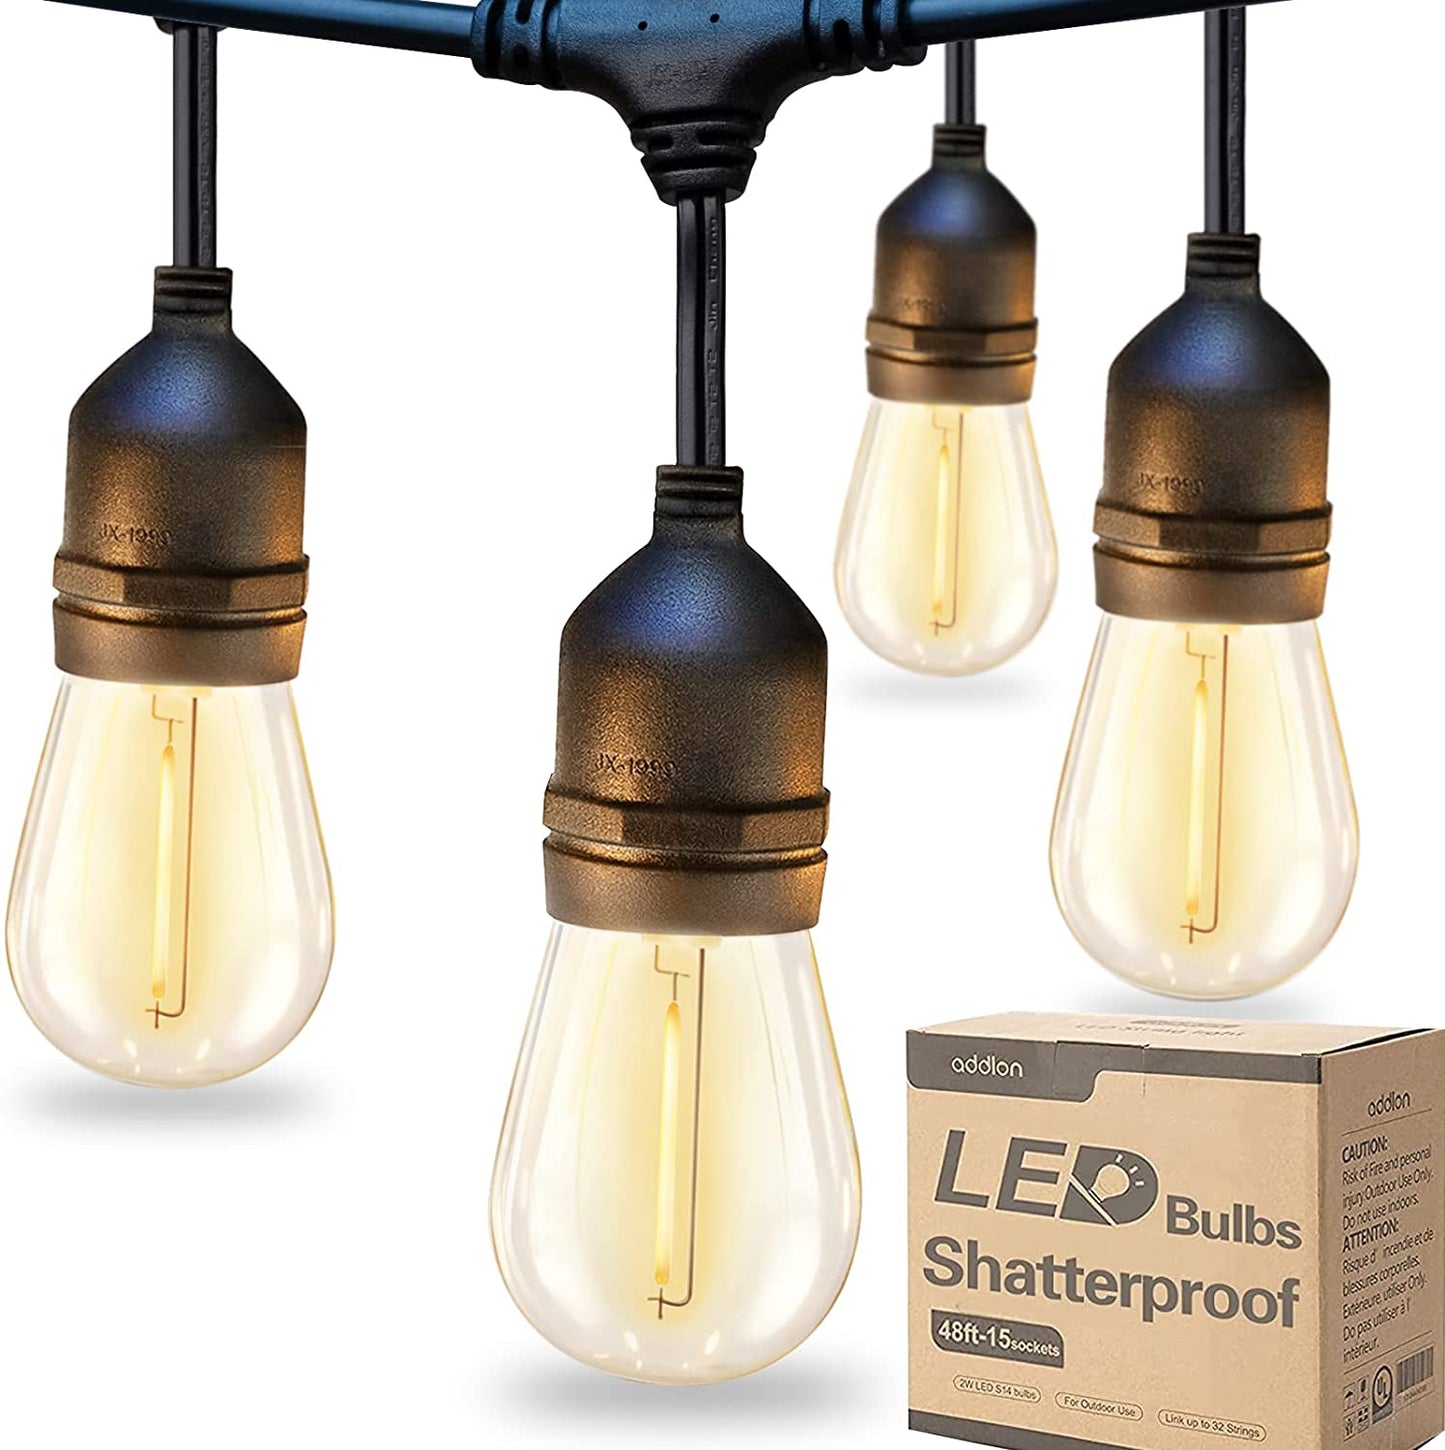 addlon LED Outdoor String Lights 48FT with 2W Dimmable Edison Vintage Shatterproof Bulbs and Commercial Grade Weatherproof Strand - ETL Listed Heavy-D